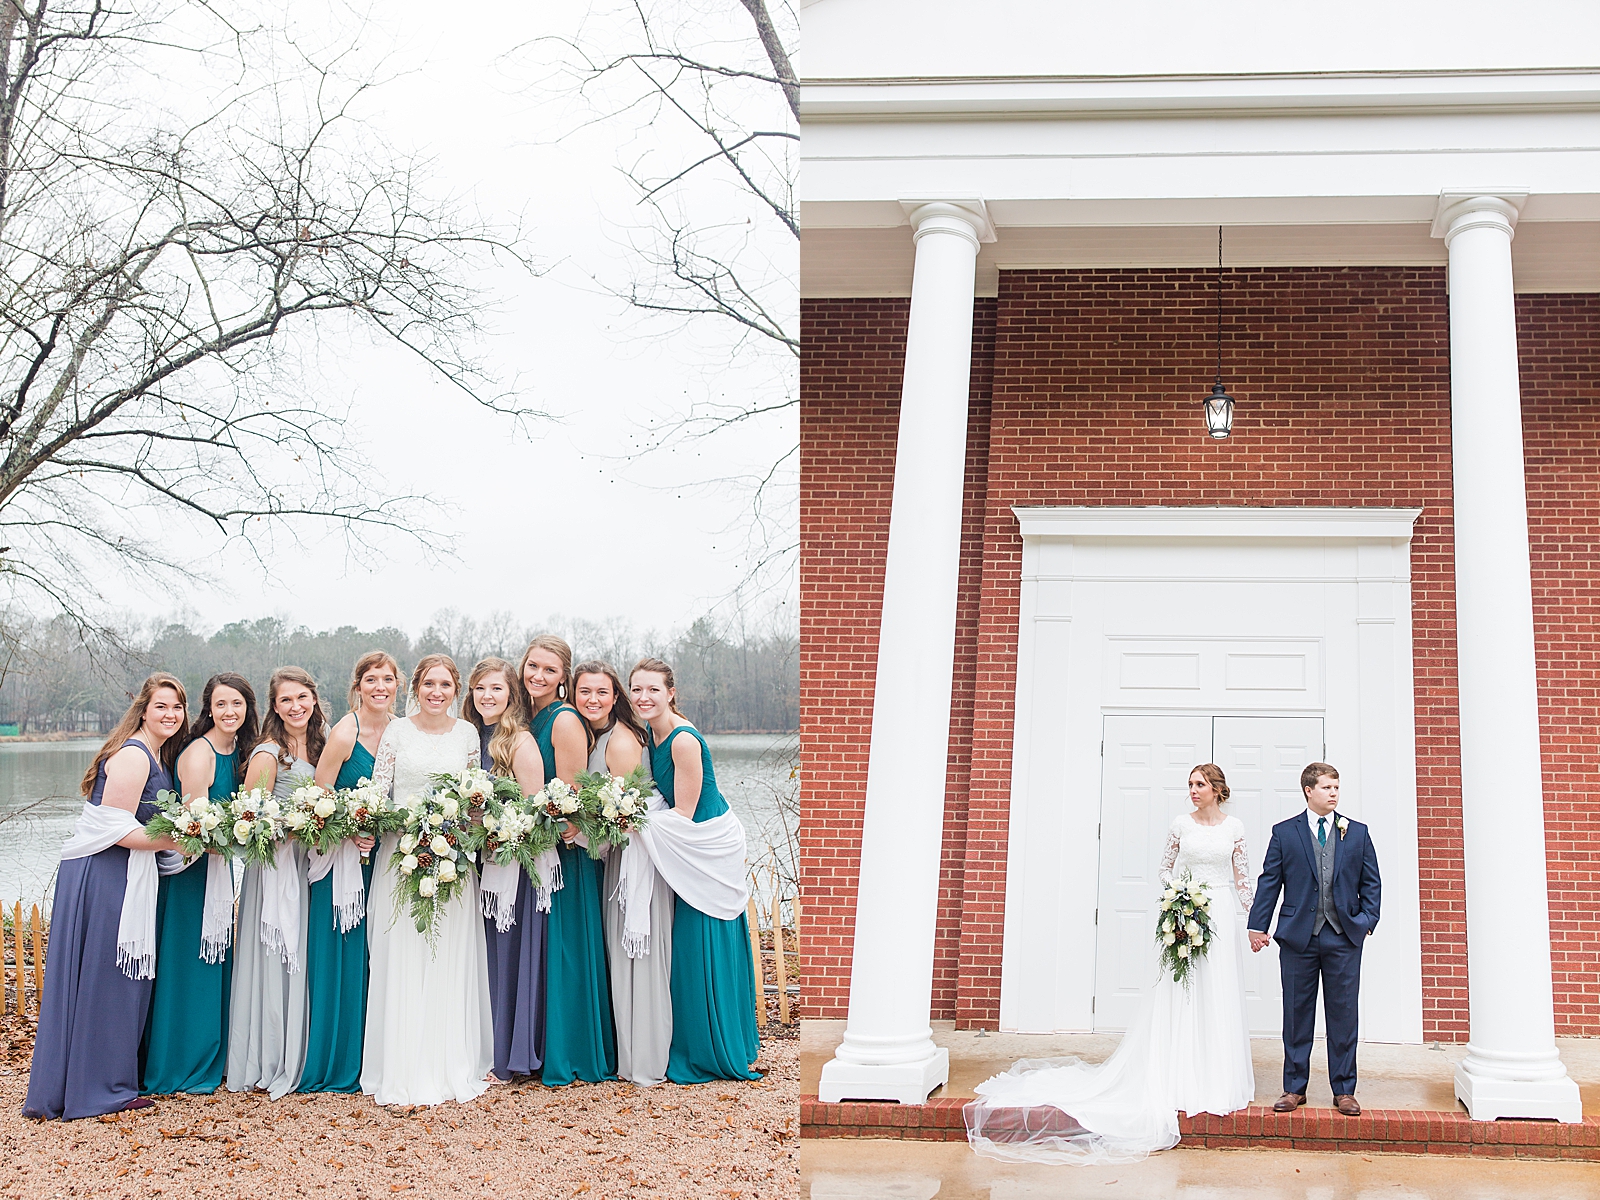 Charlotte Wedding Bride with Bridesmaids at Riverwood Manor Venue and Bride and Groom in front of church looking opposite directions Photos